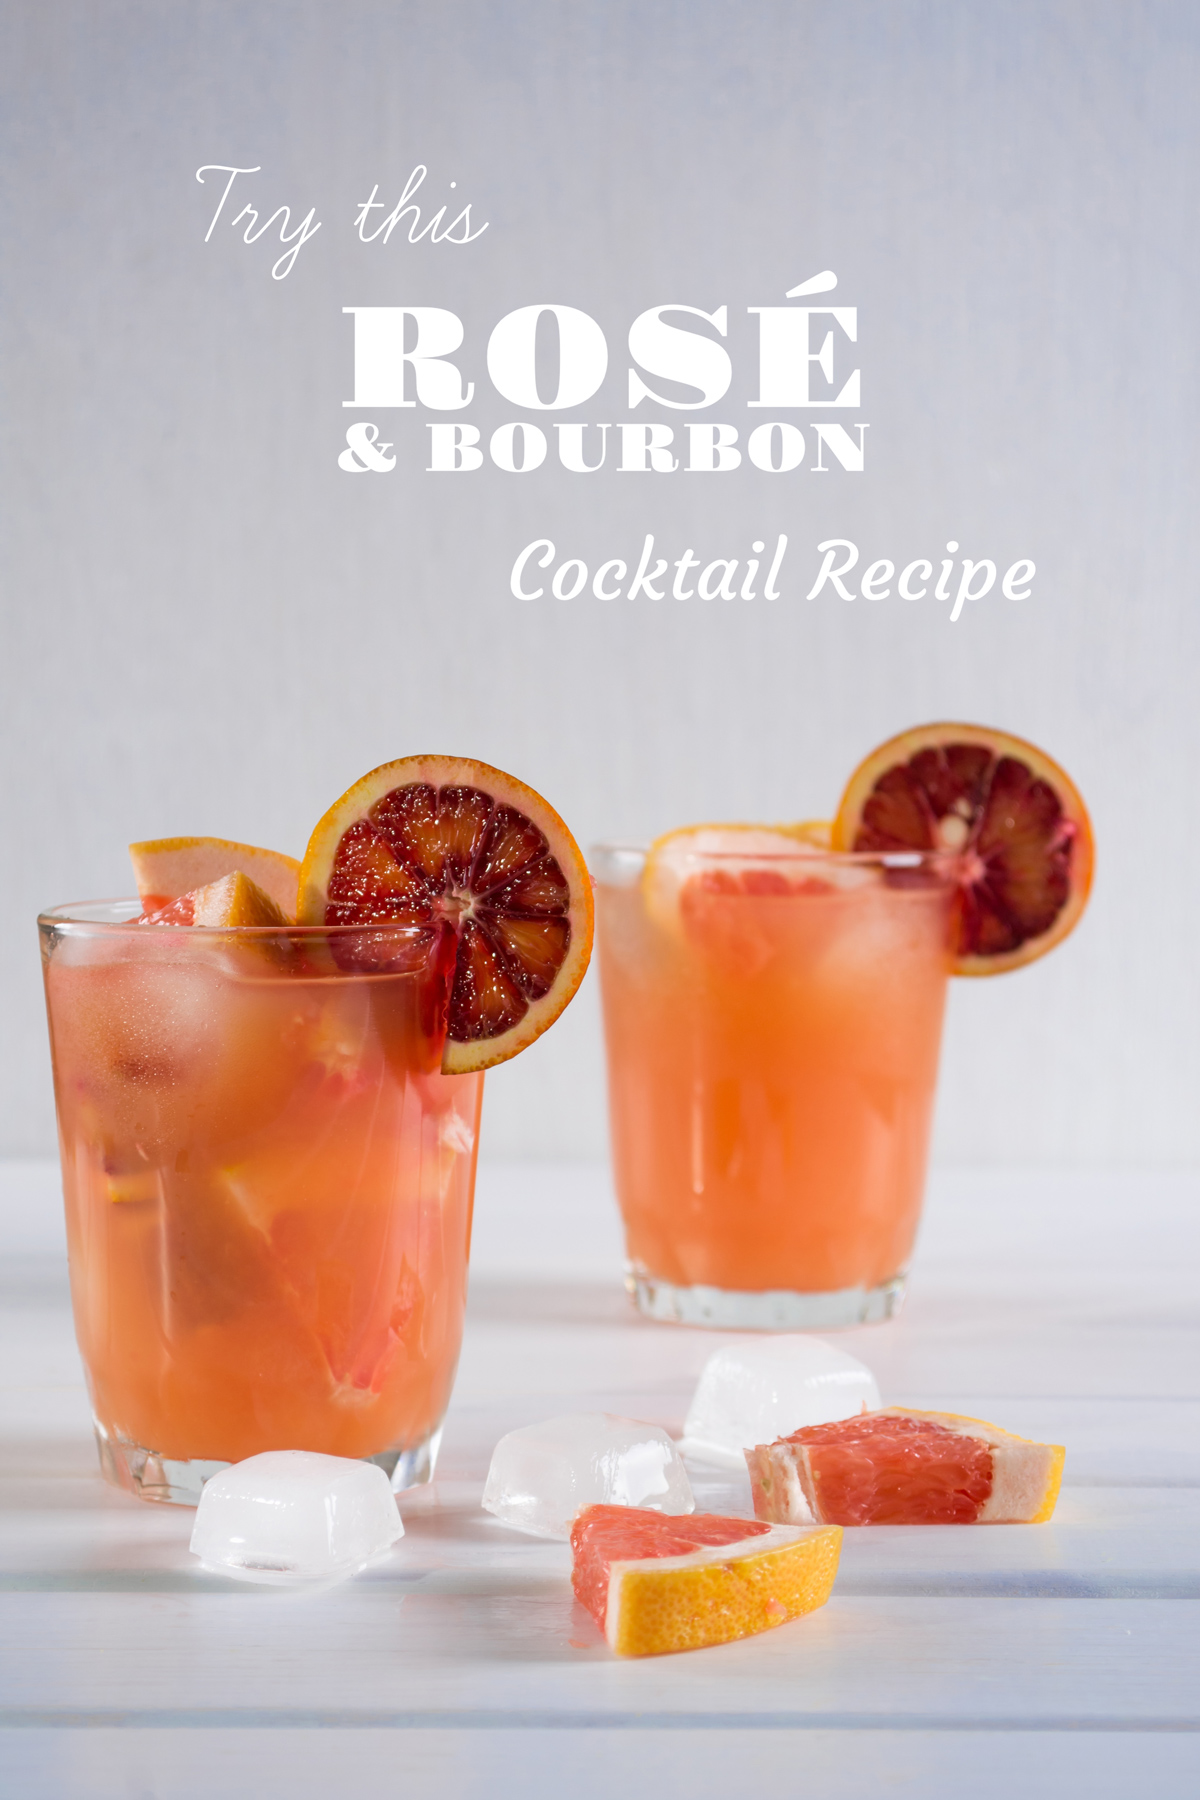 Learn how to make the Rebel Rosé cocktail made with Redemption Bourbon and Josh Cellars Rosé